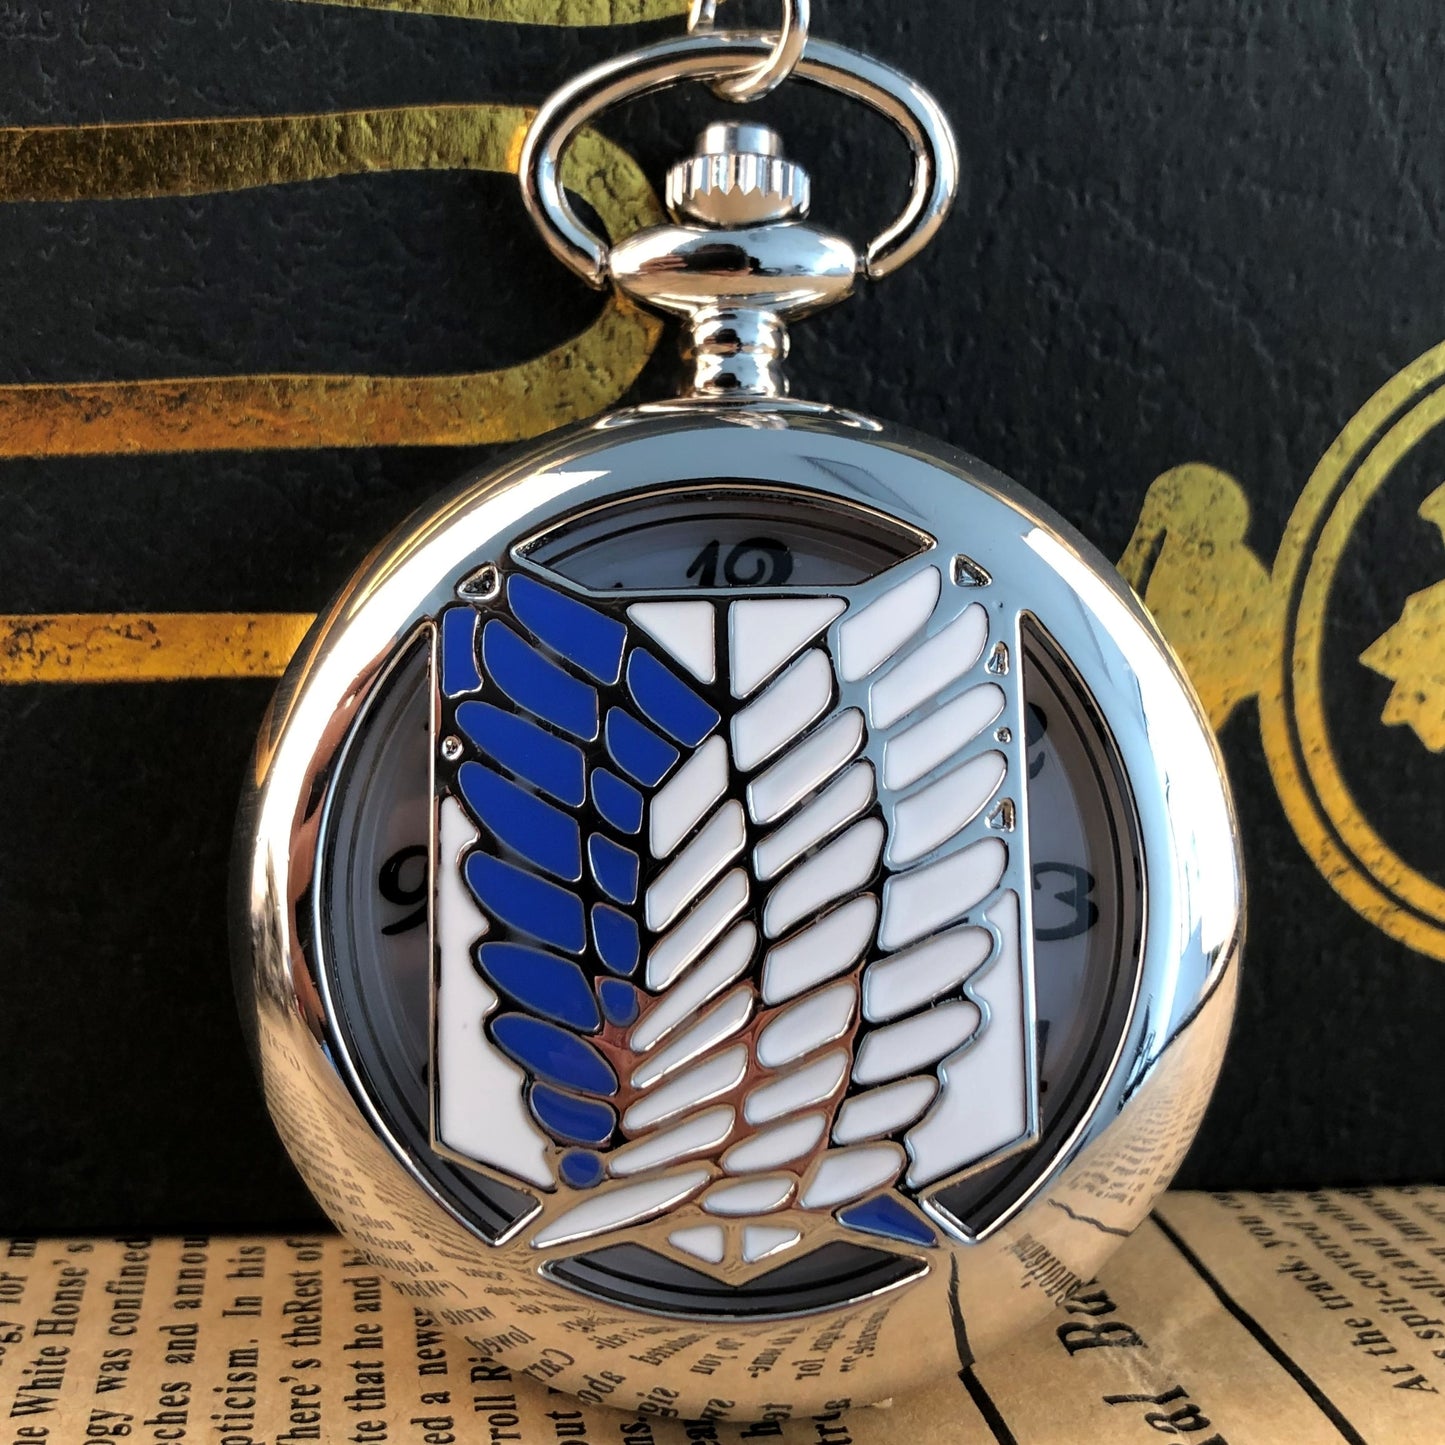 AOT Vintage Watch